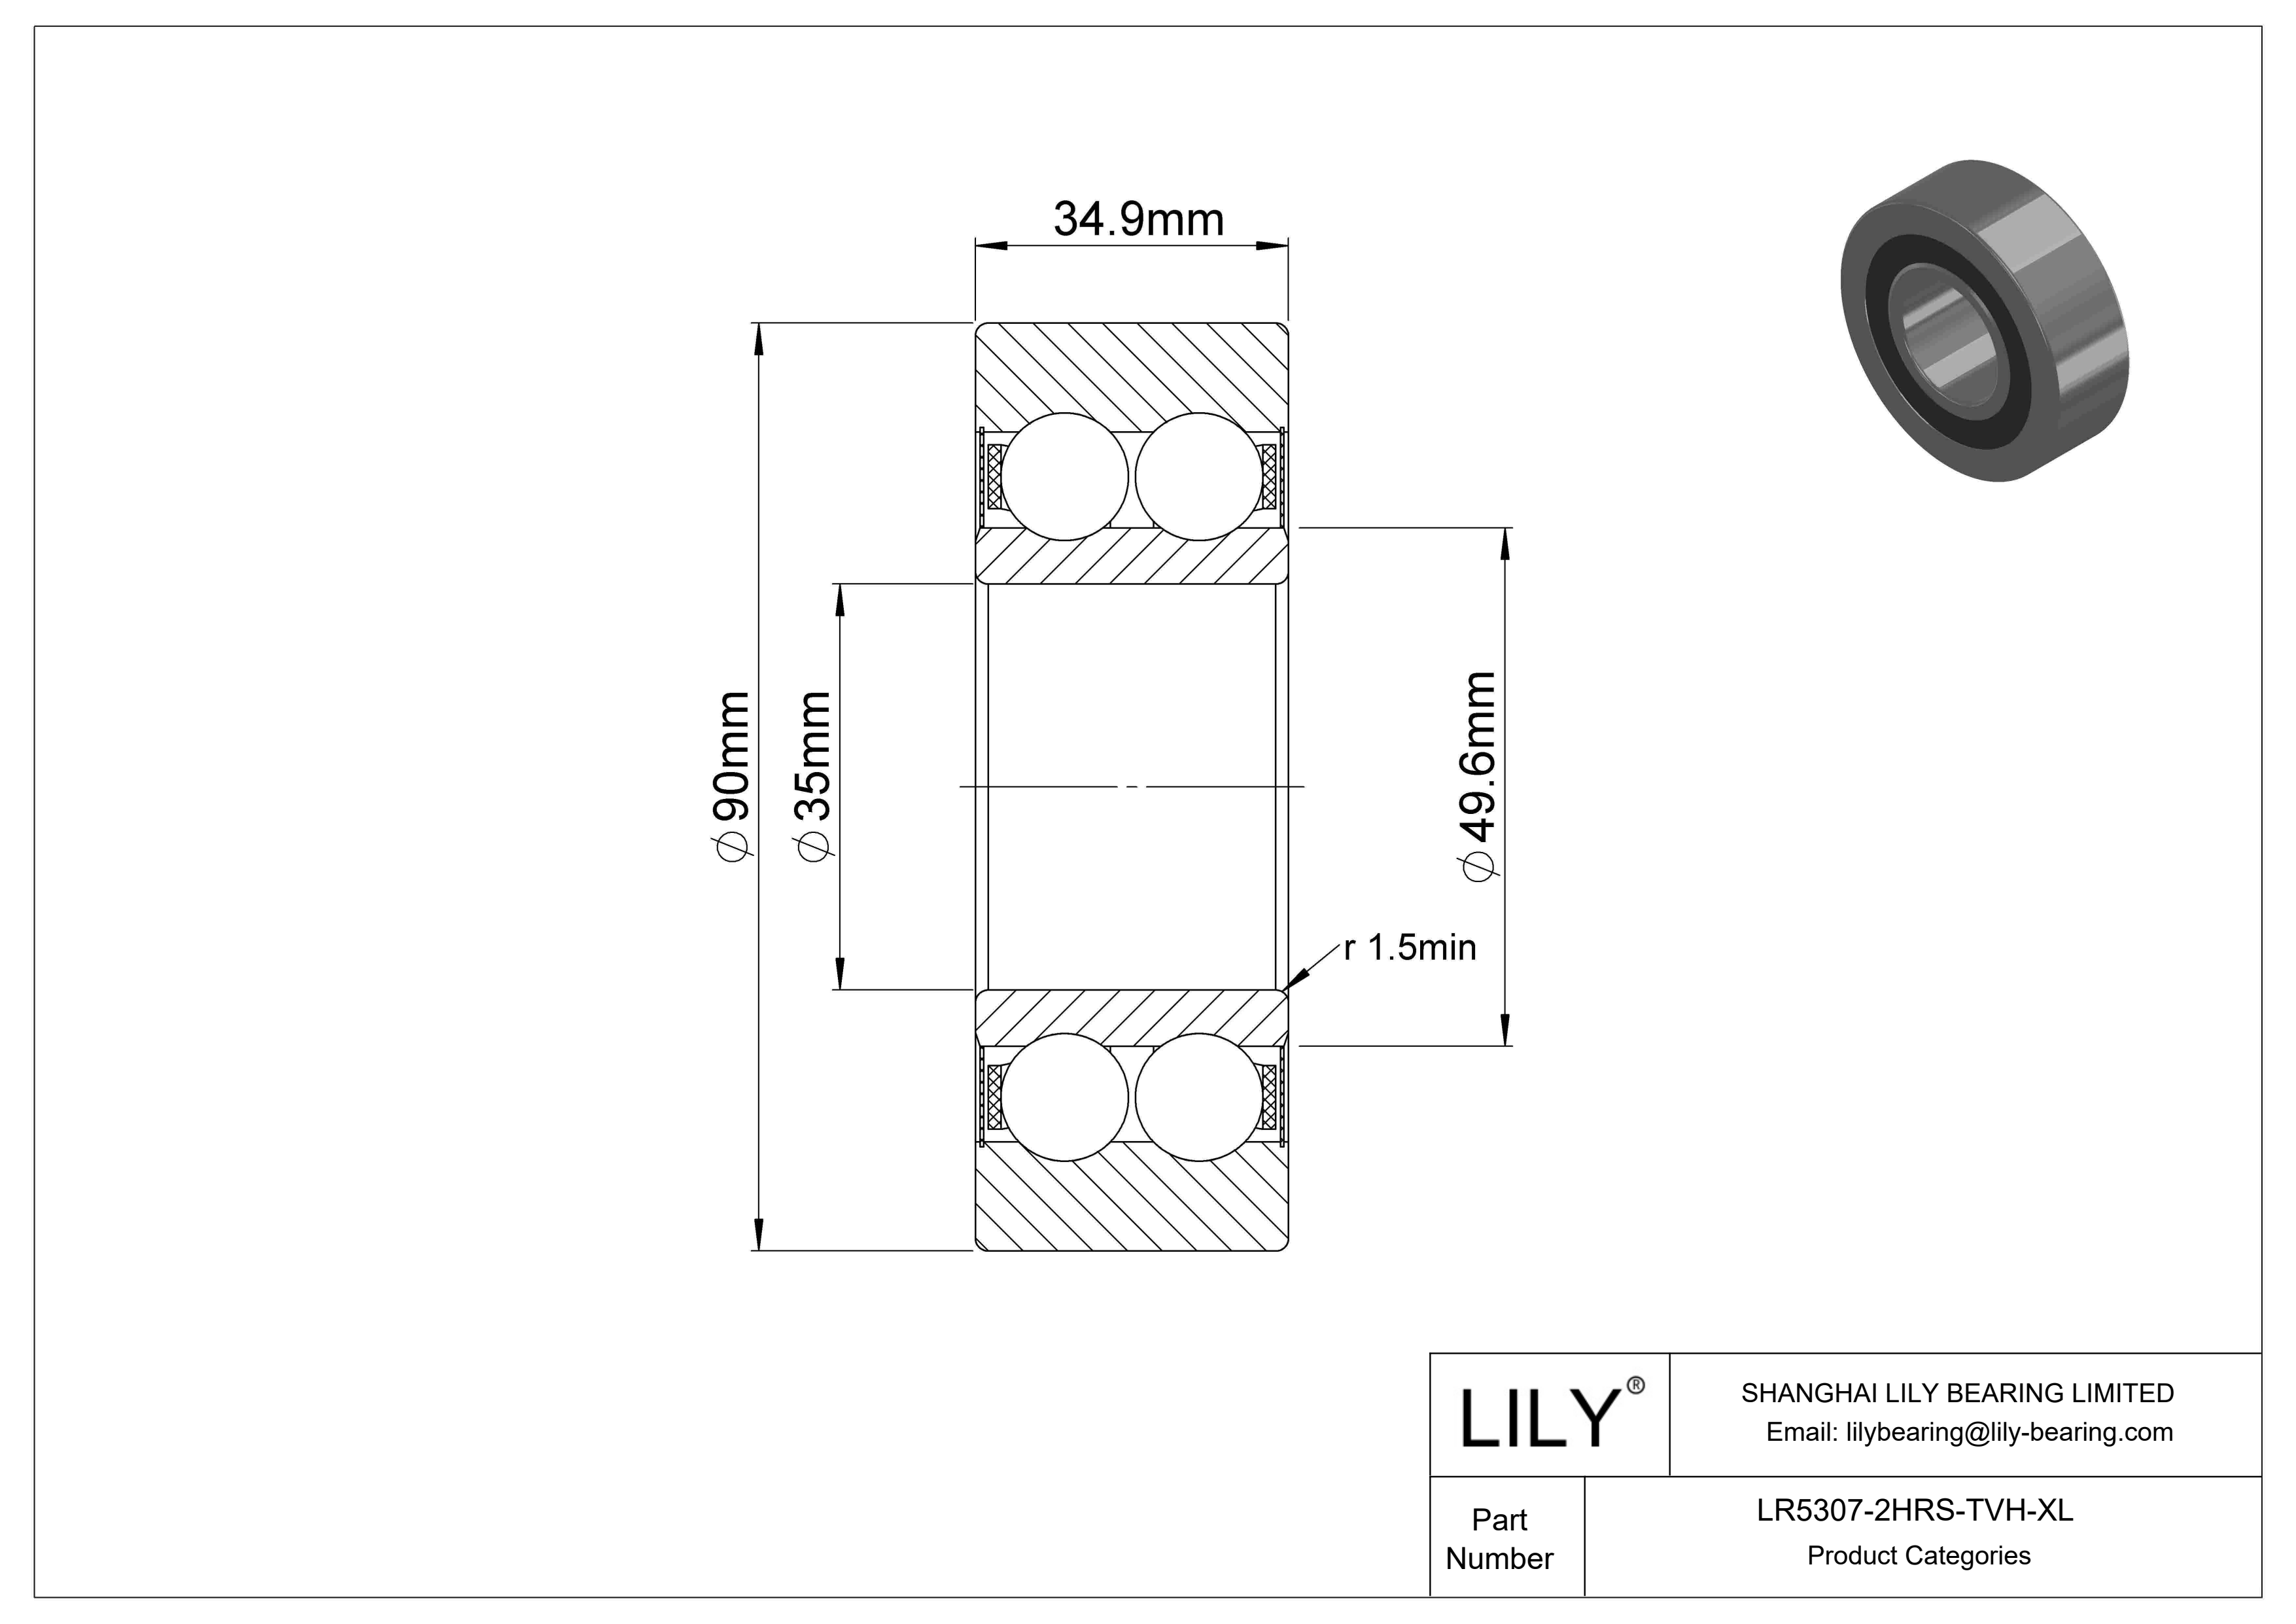 LR5307-2HRS-TVH-XL Yoke Type Track Rollers cad drawing